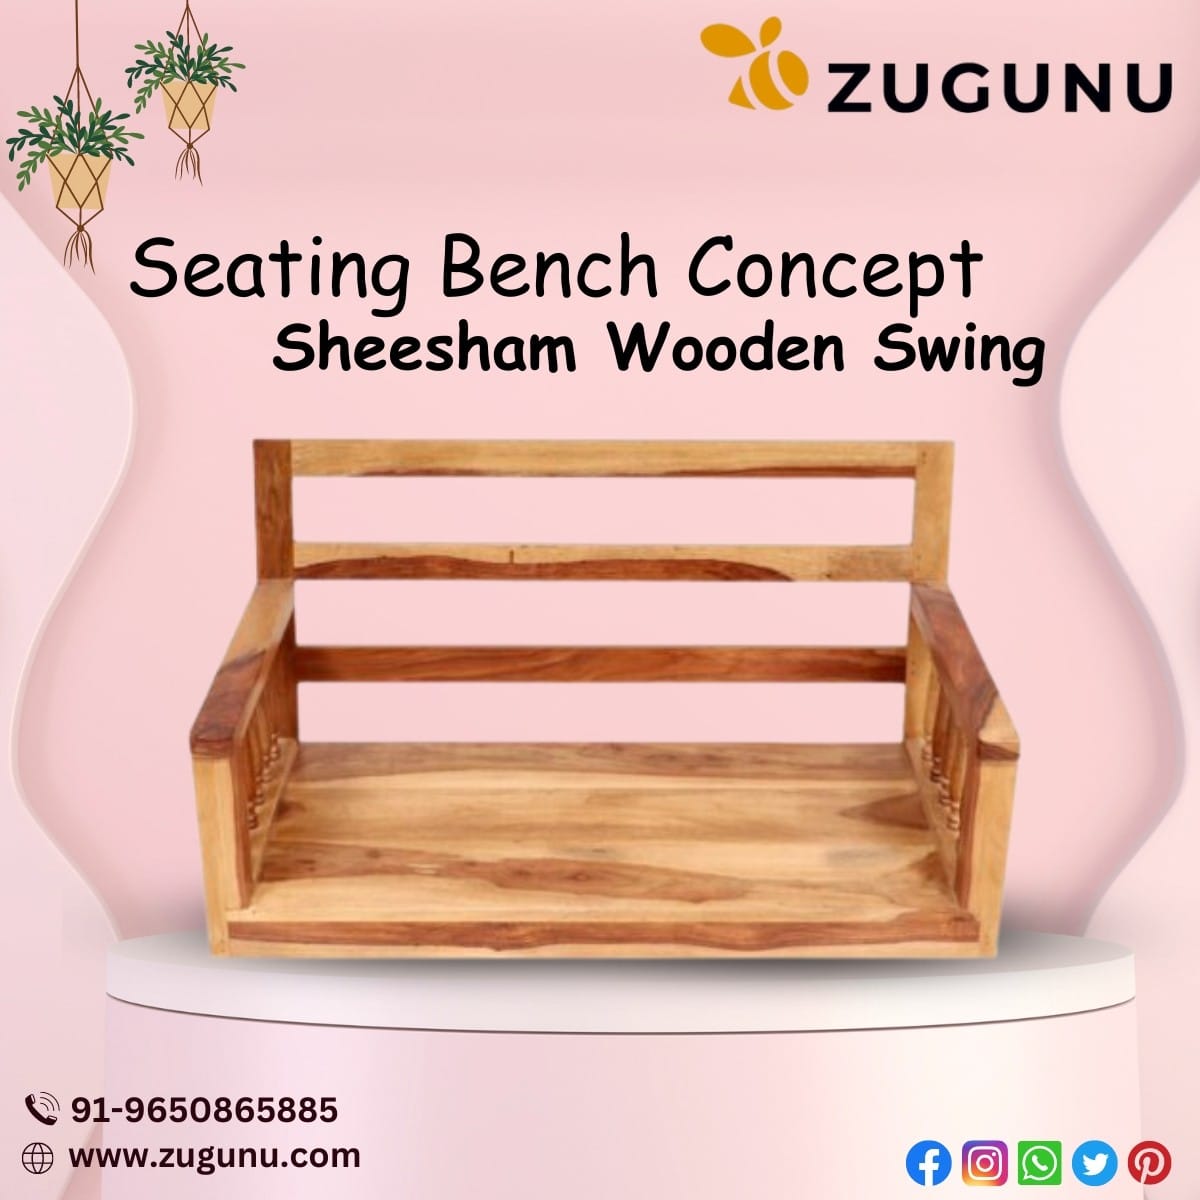 Sheesham Wood Swing Perfect Addition To Home Decor